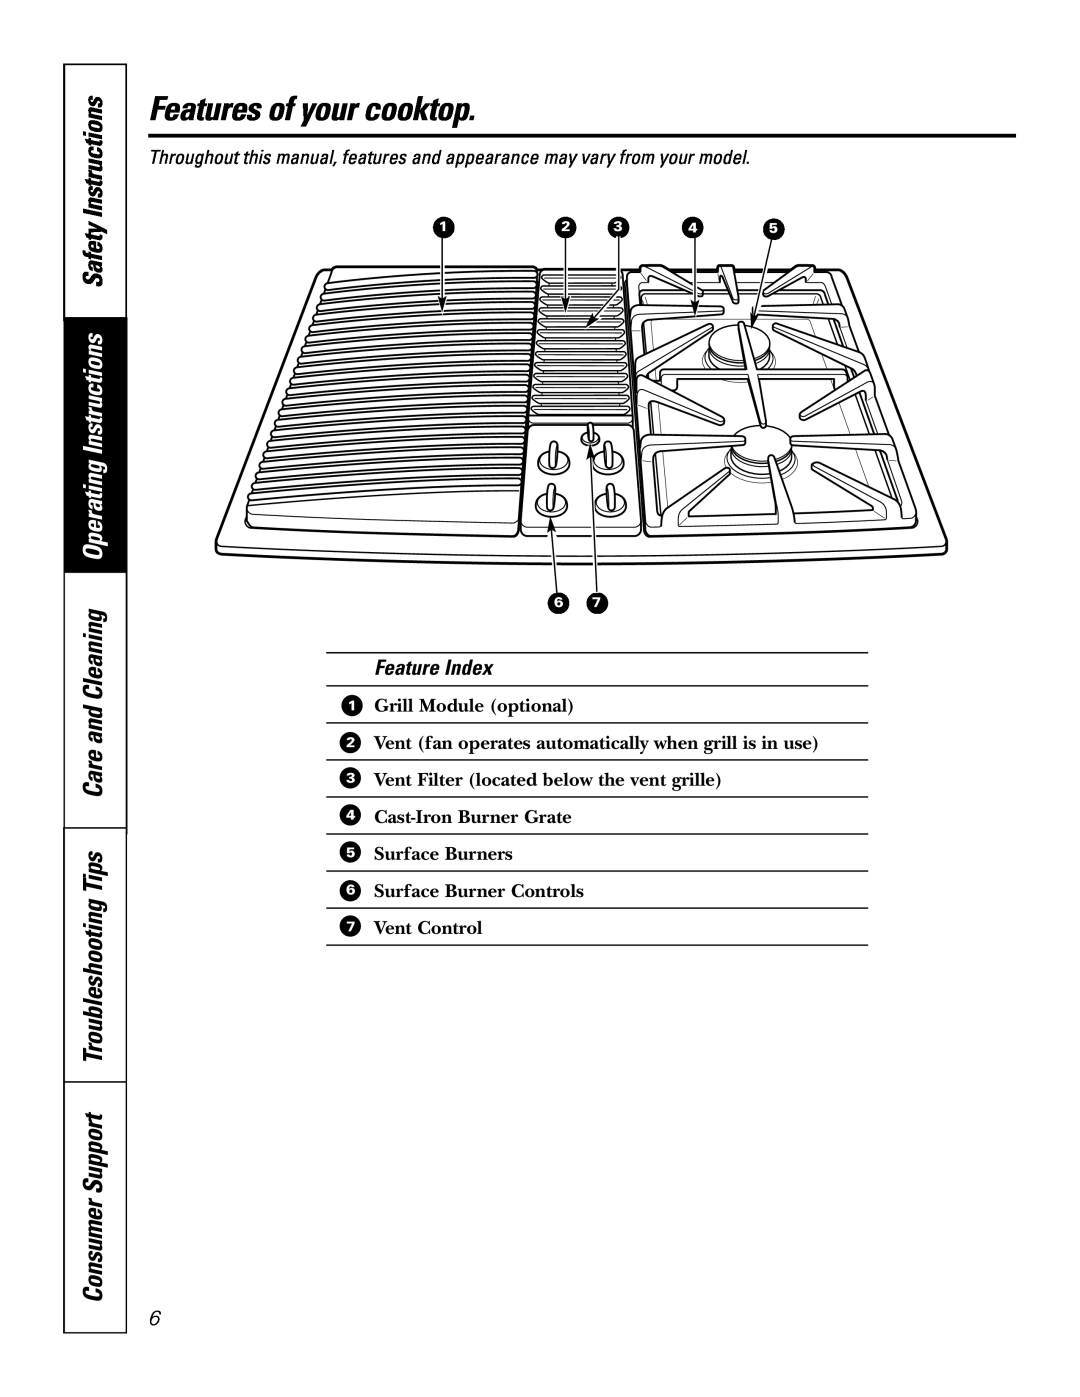 GE JGP985 owner manual Features of your cooktop, Feature Index 